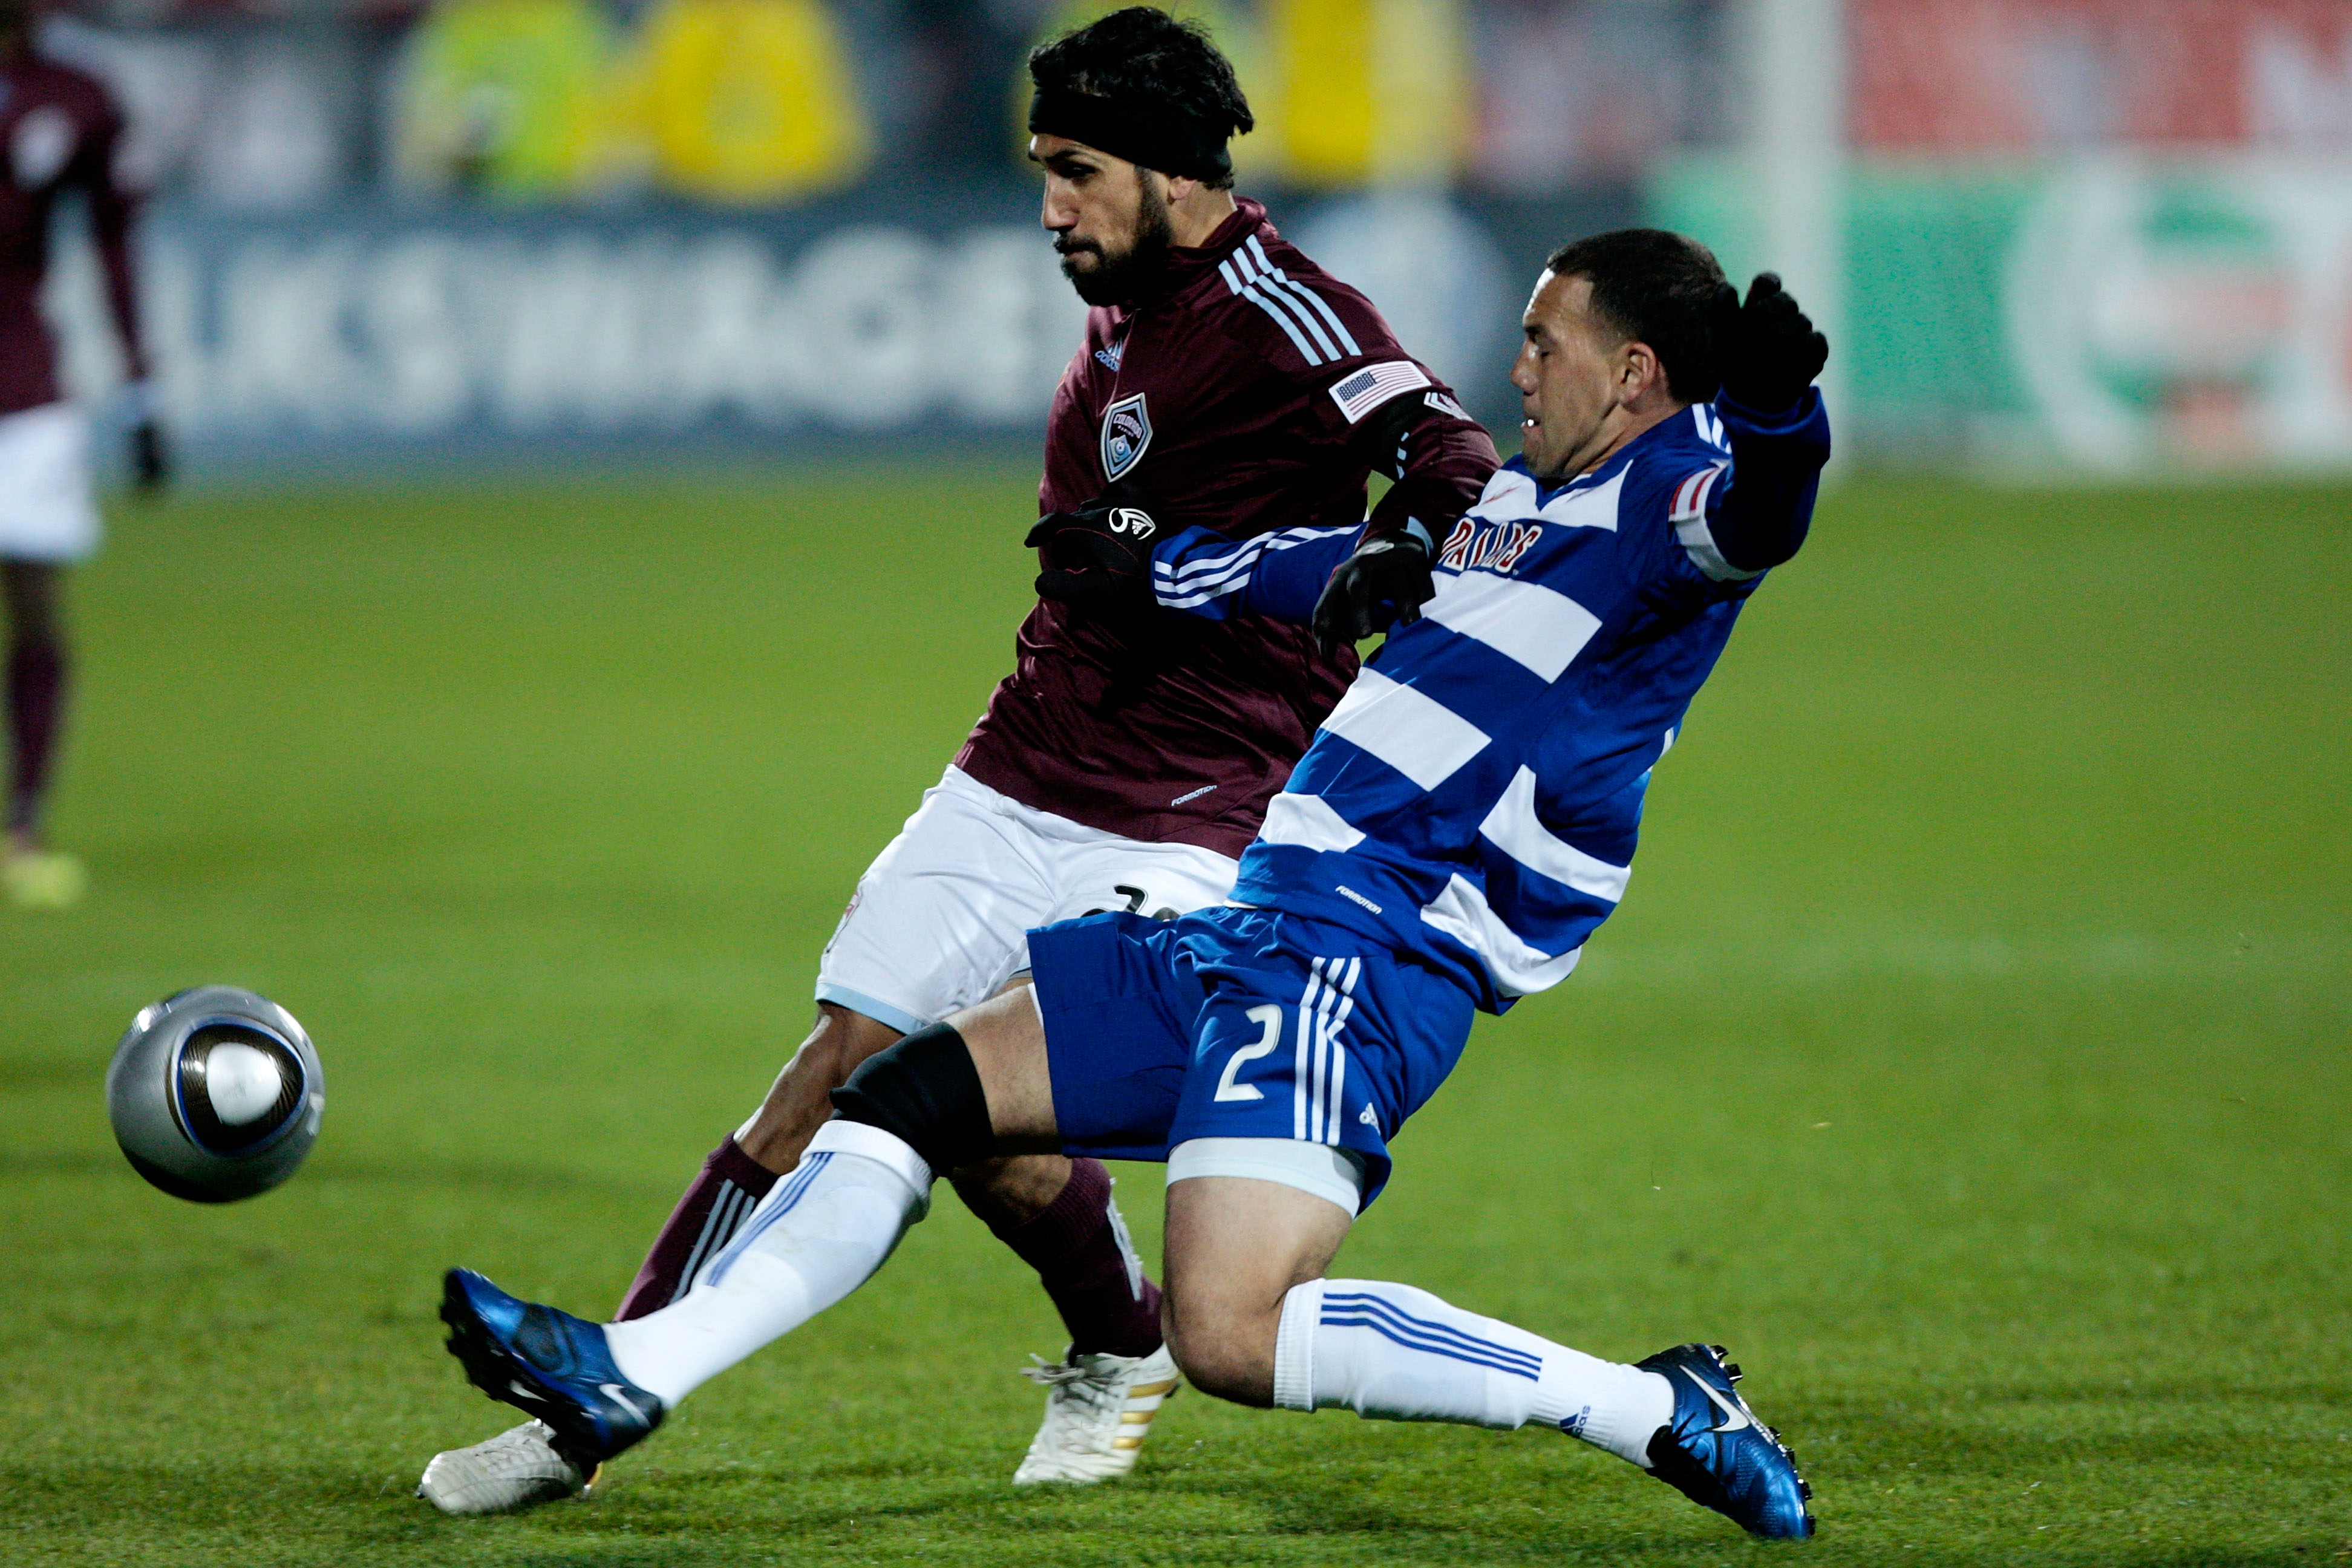 TORONTO, ON - NOVEMBER 21:  Captain Pablo Mastroeni #25 of the Colorado Rapids battles for the ball against Daniel Hernandez #2 of FC Dallas during the first half of the 2010 MLS Cup match at BMO Field on November 21, 2010 in Toronto, Canada.  (Photo by A